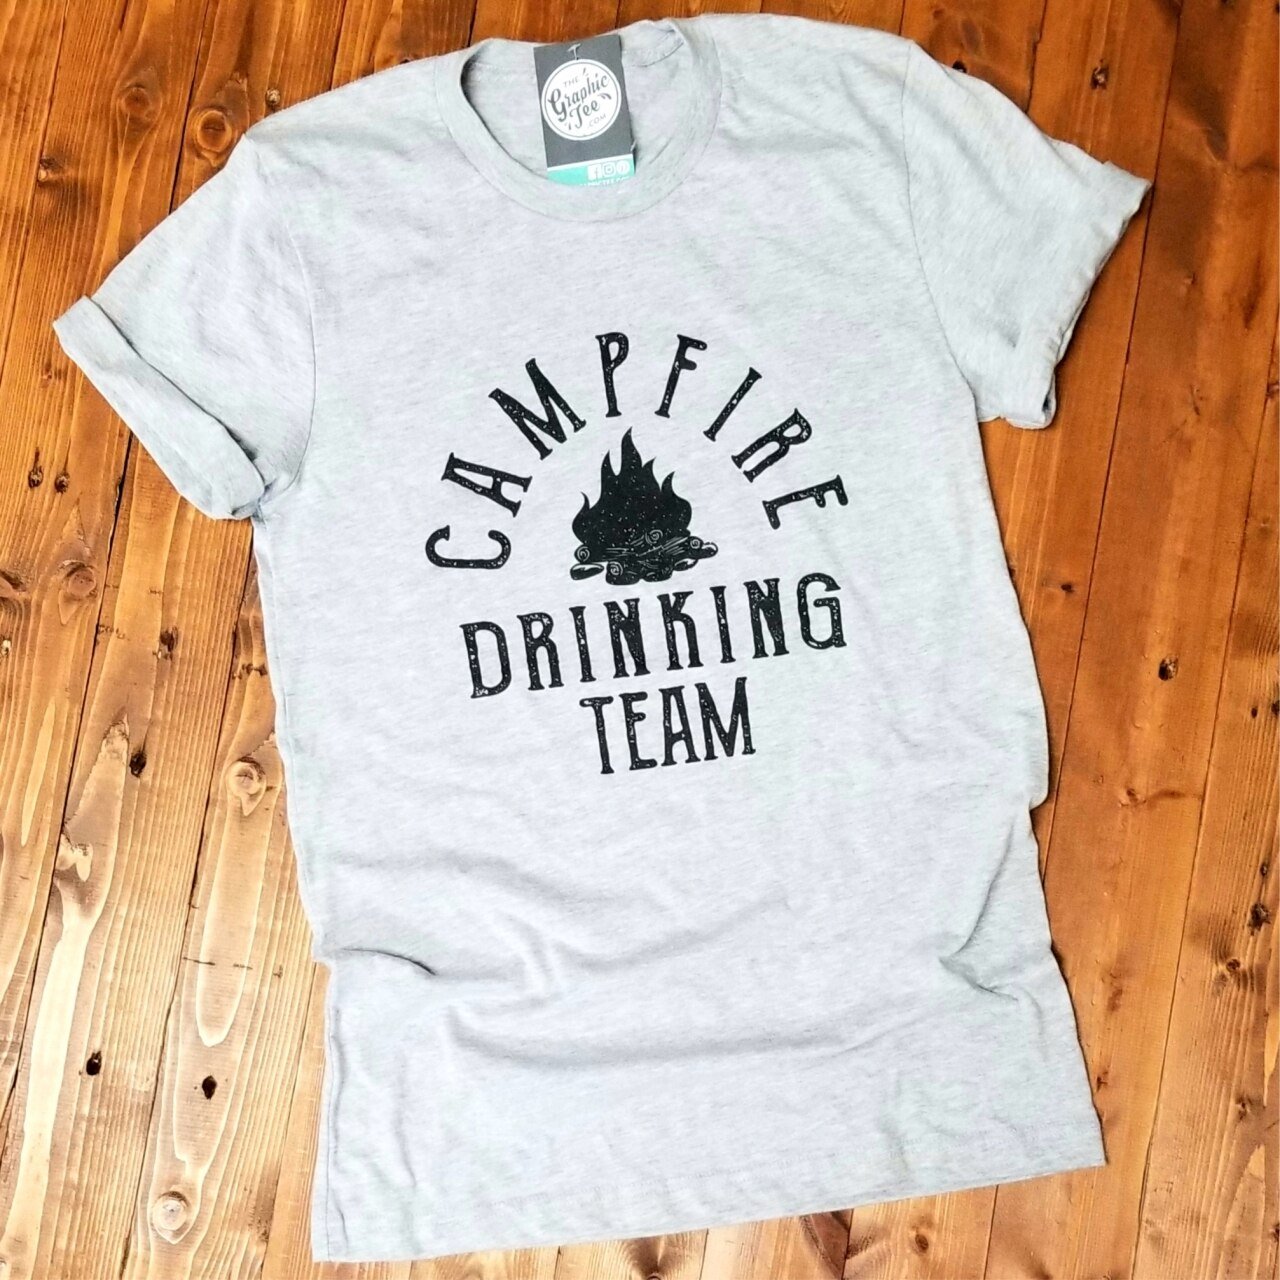 Campfire Drinking Team - Unisex Tee - The Graphic Tee